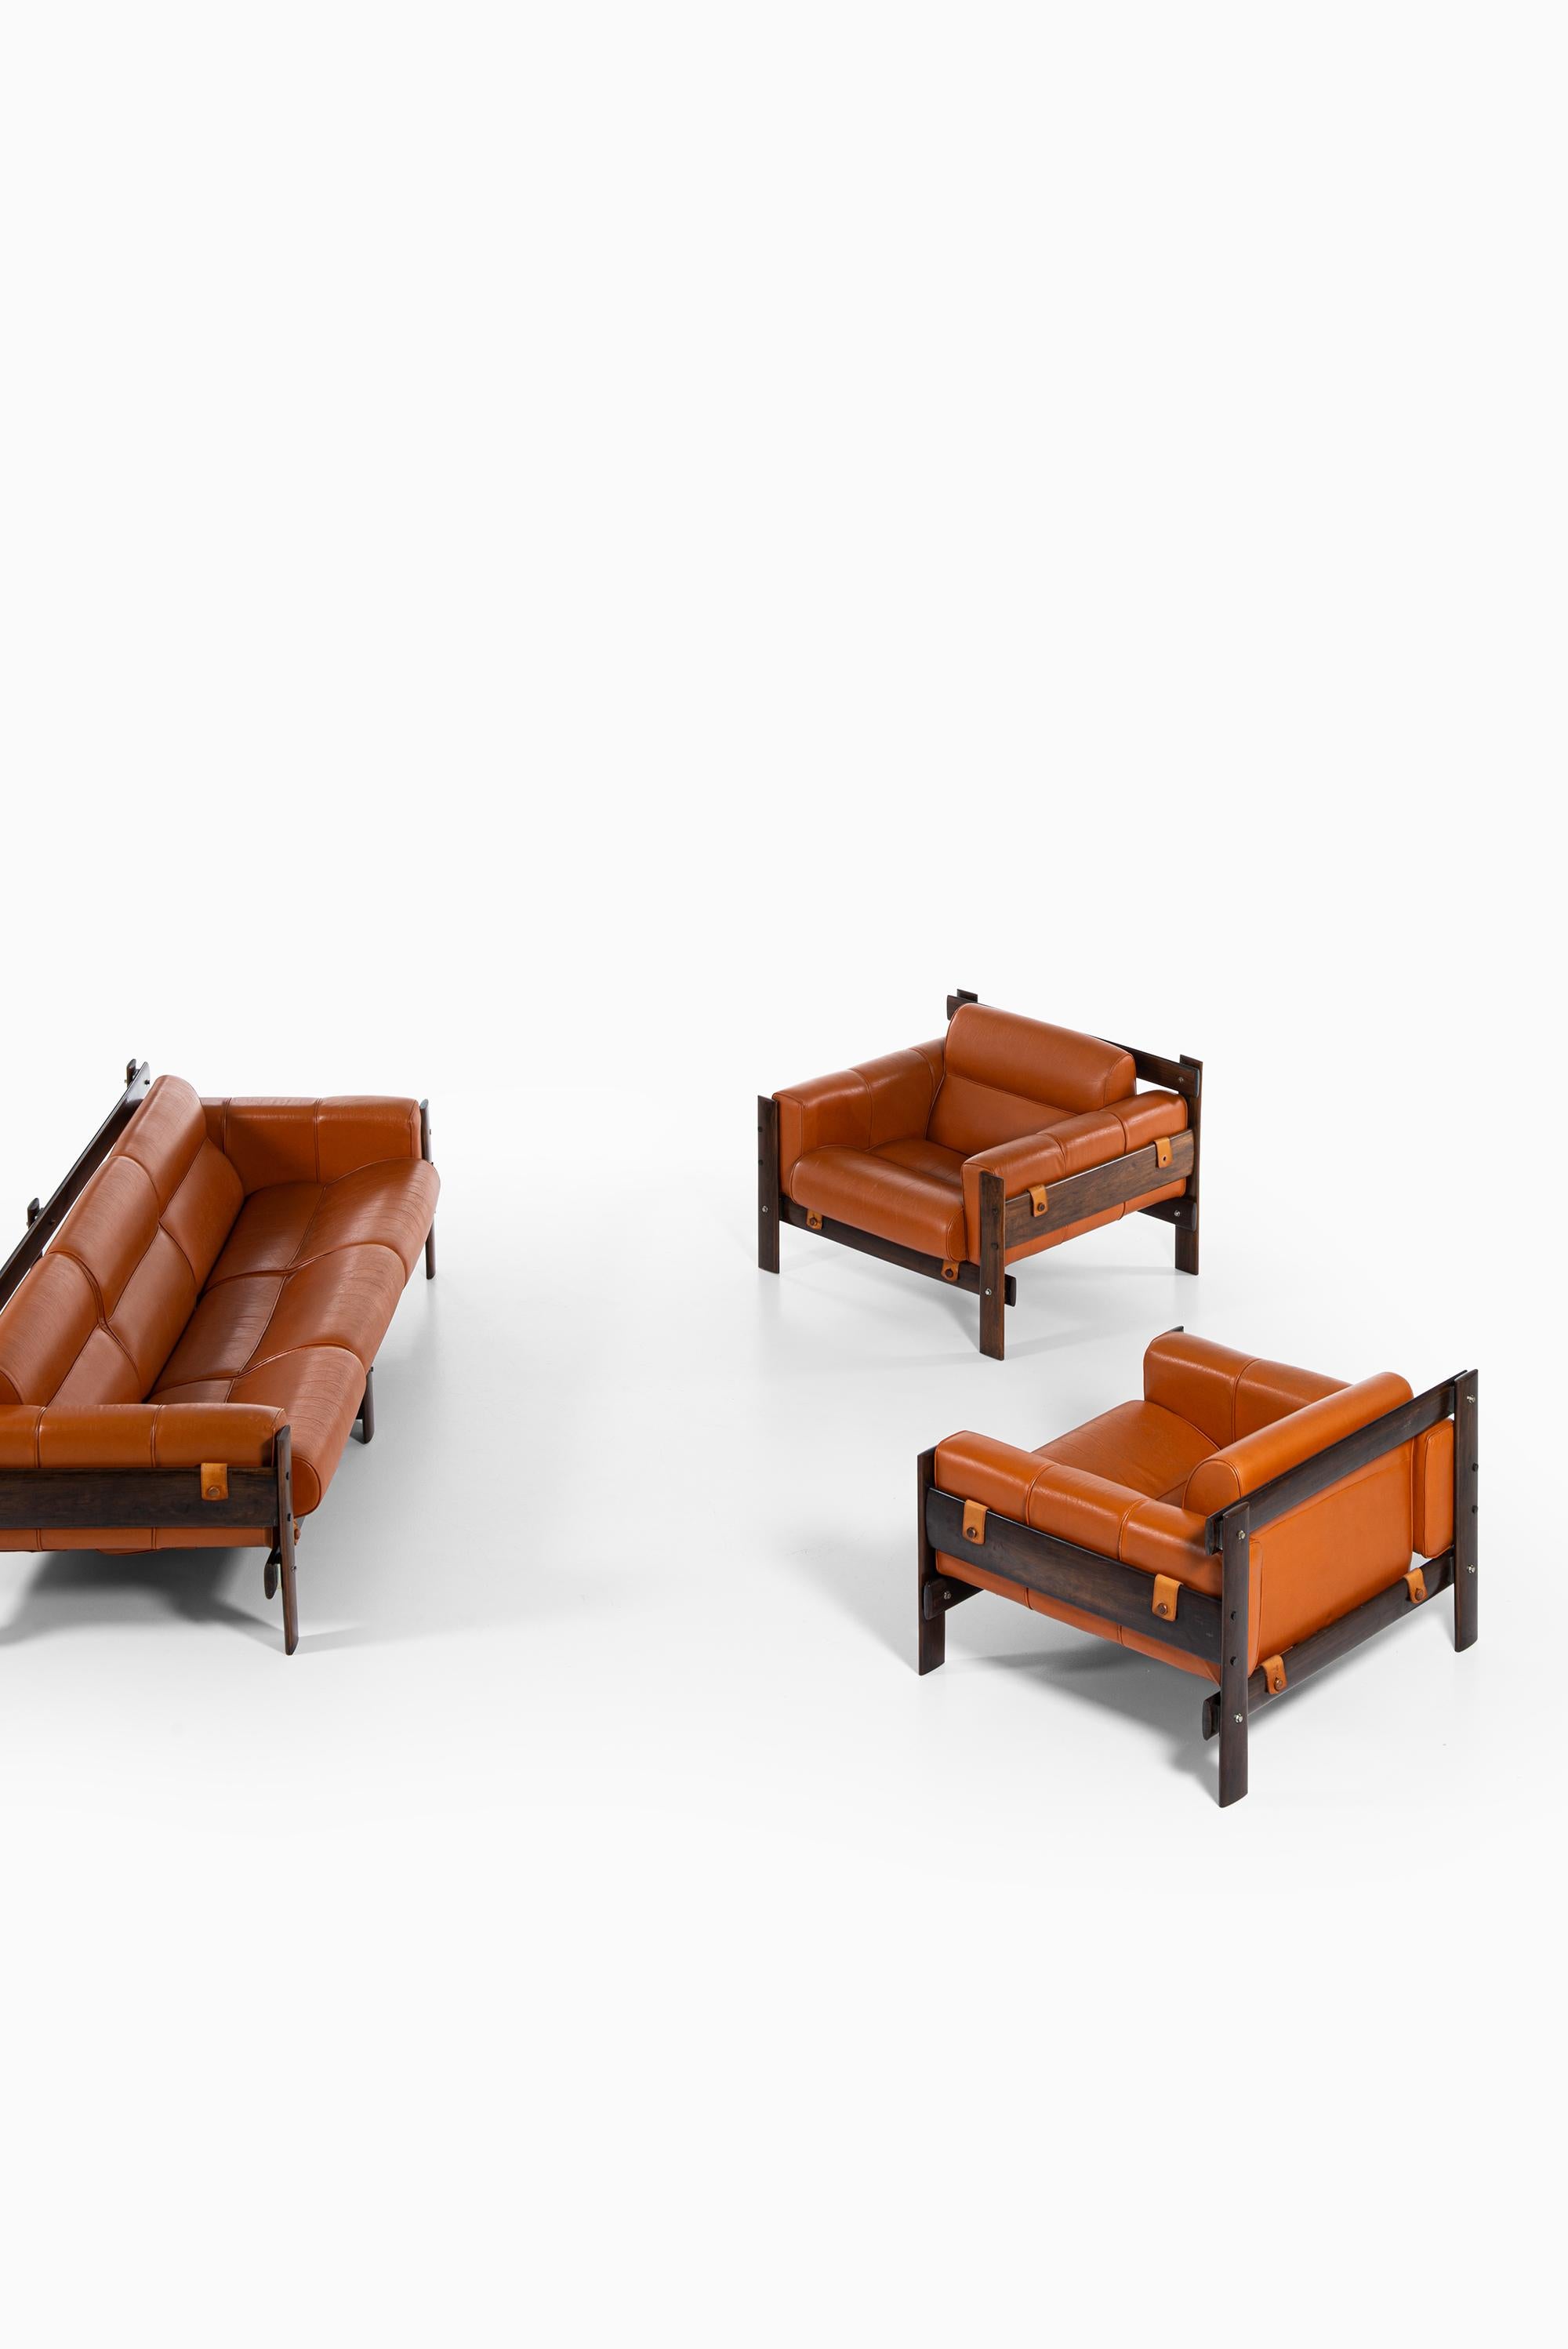 Percival Lafer Easy Chairs in Rosewood and Leather by Lafer MP in Brazil 2